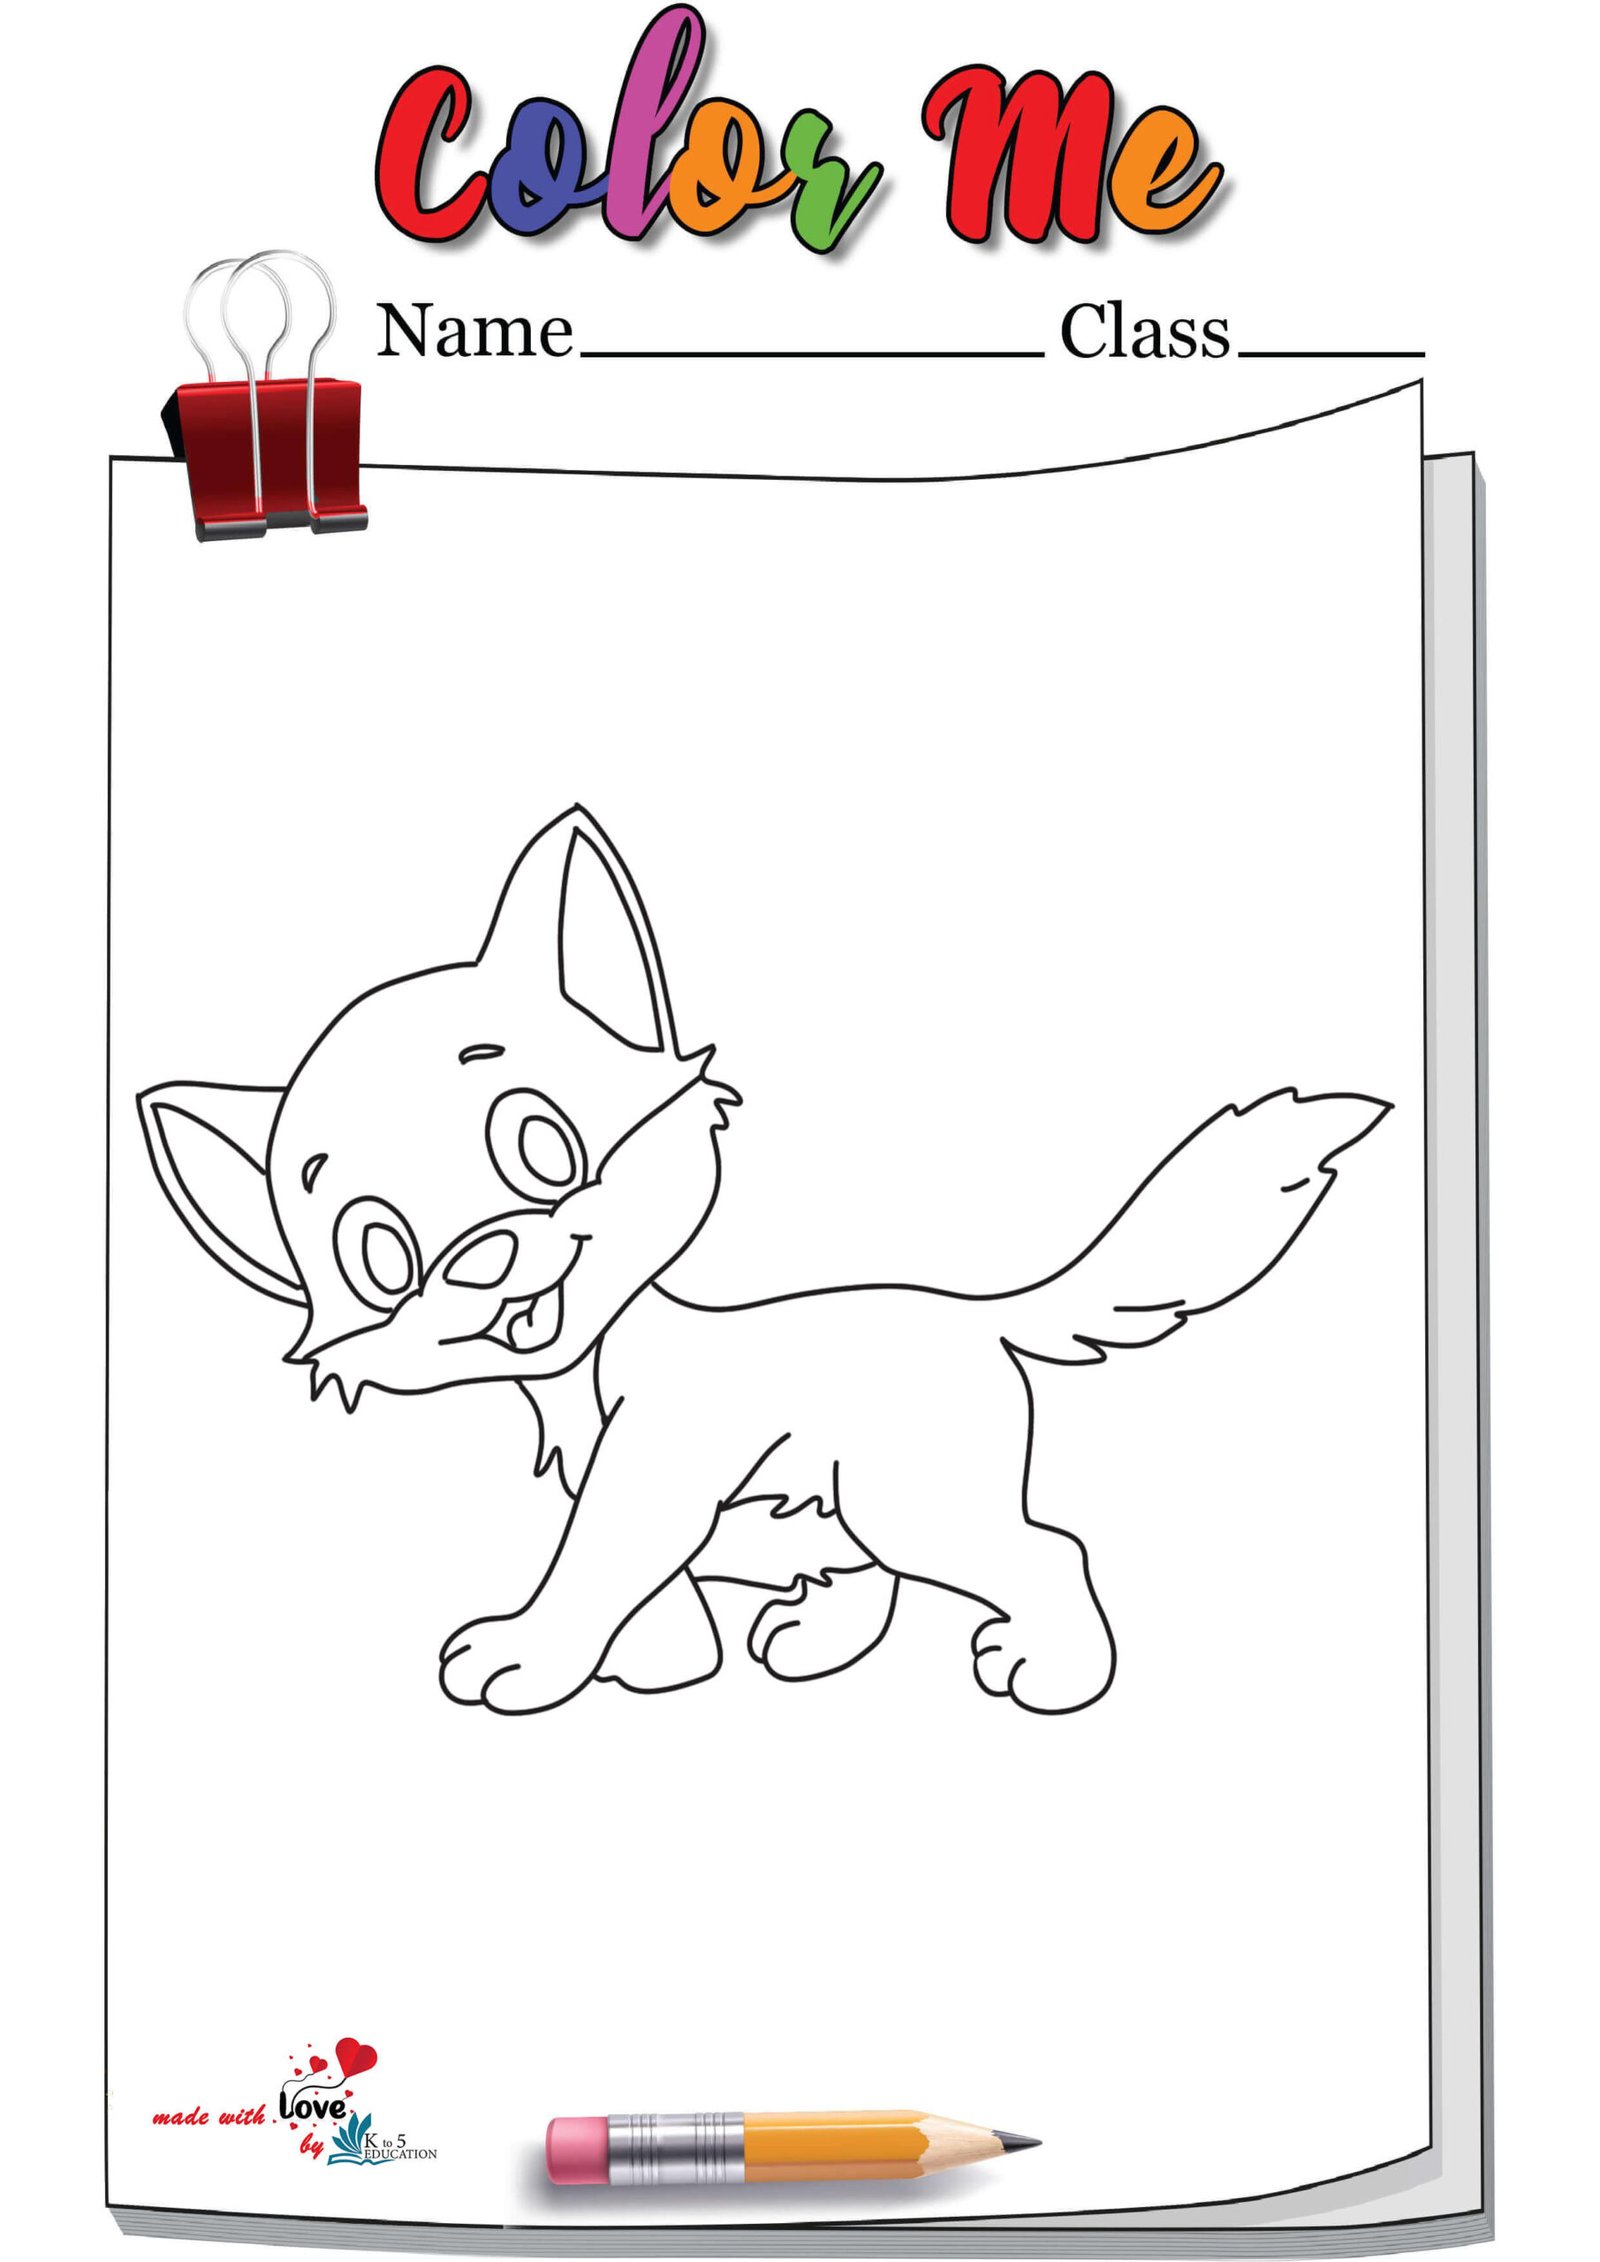 Coloring Page Outline